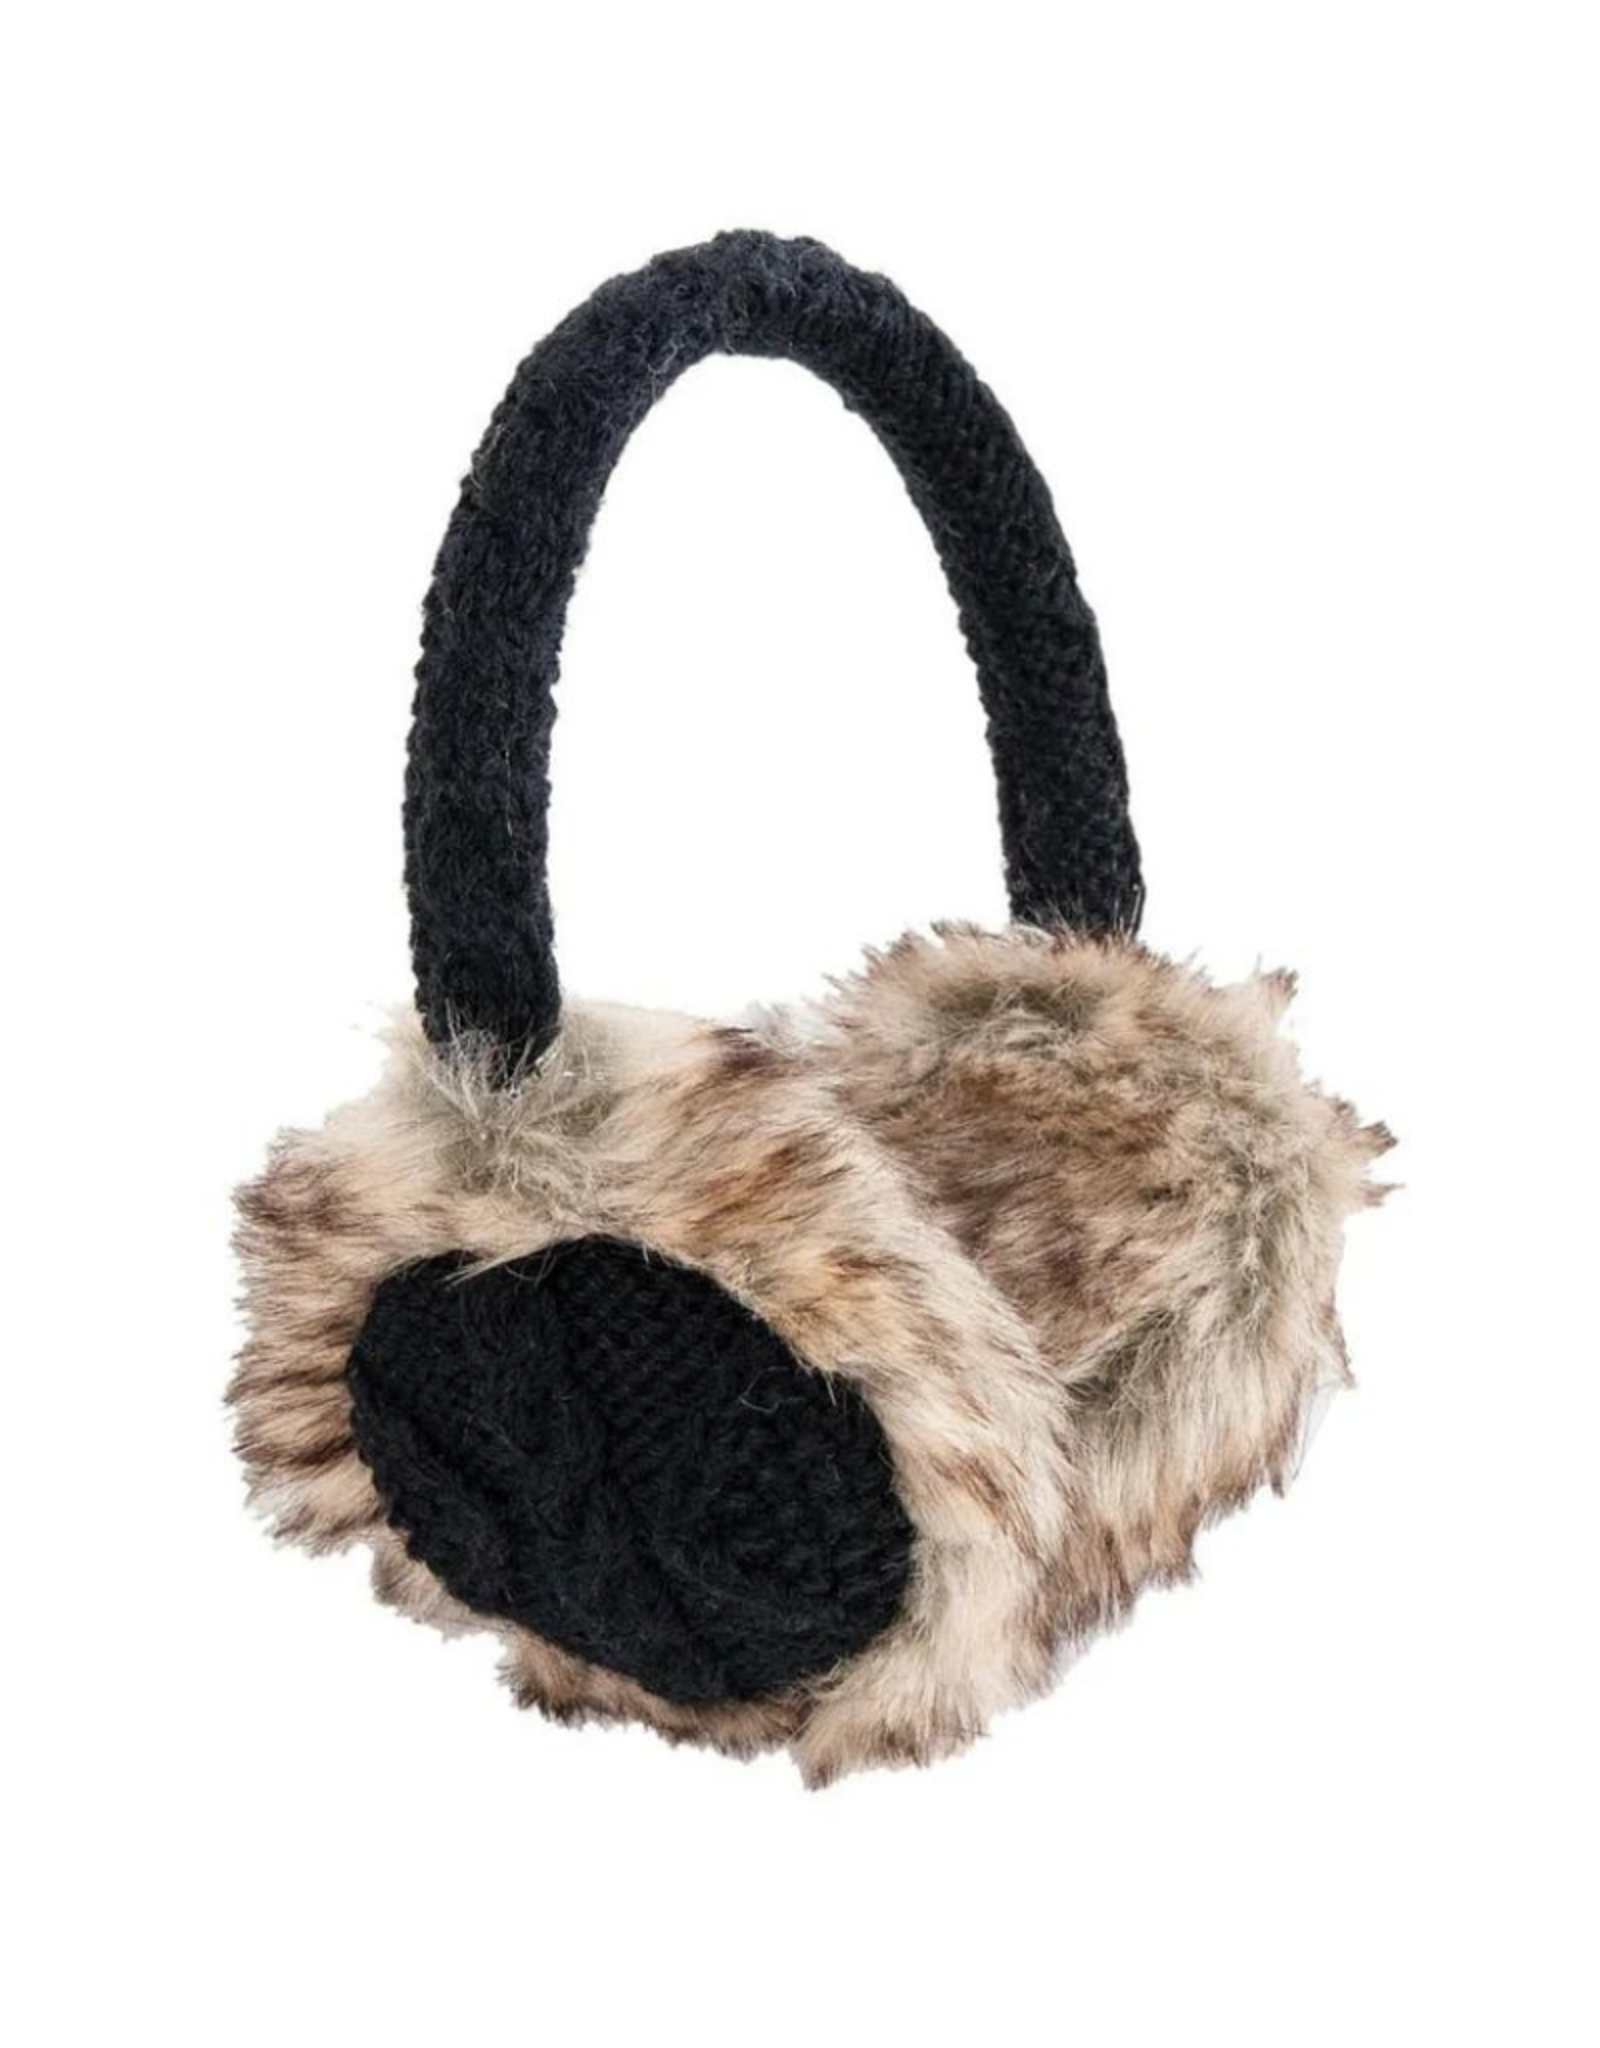 EARMUFFS-SOLID COLOR CABLE KNIT ADJUSTABLE